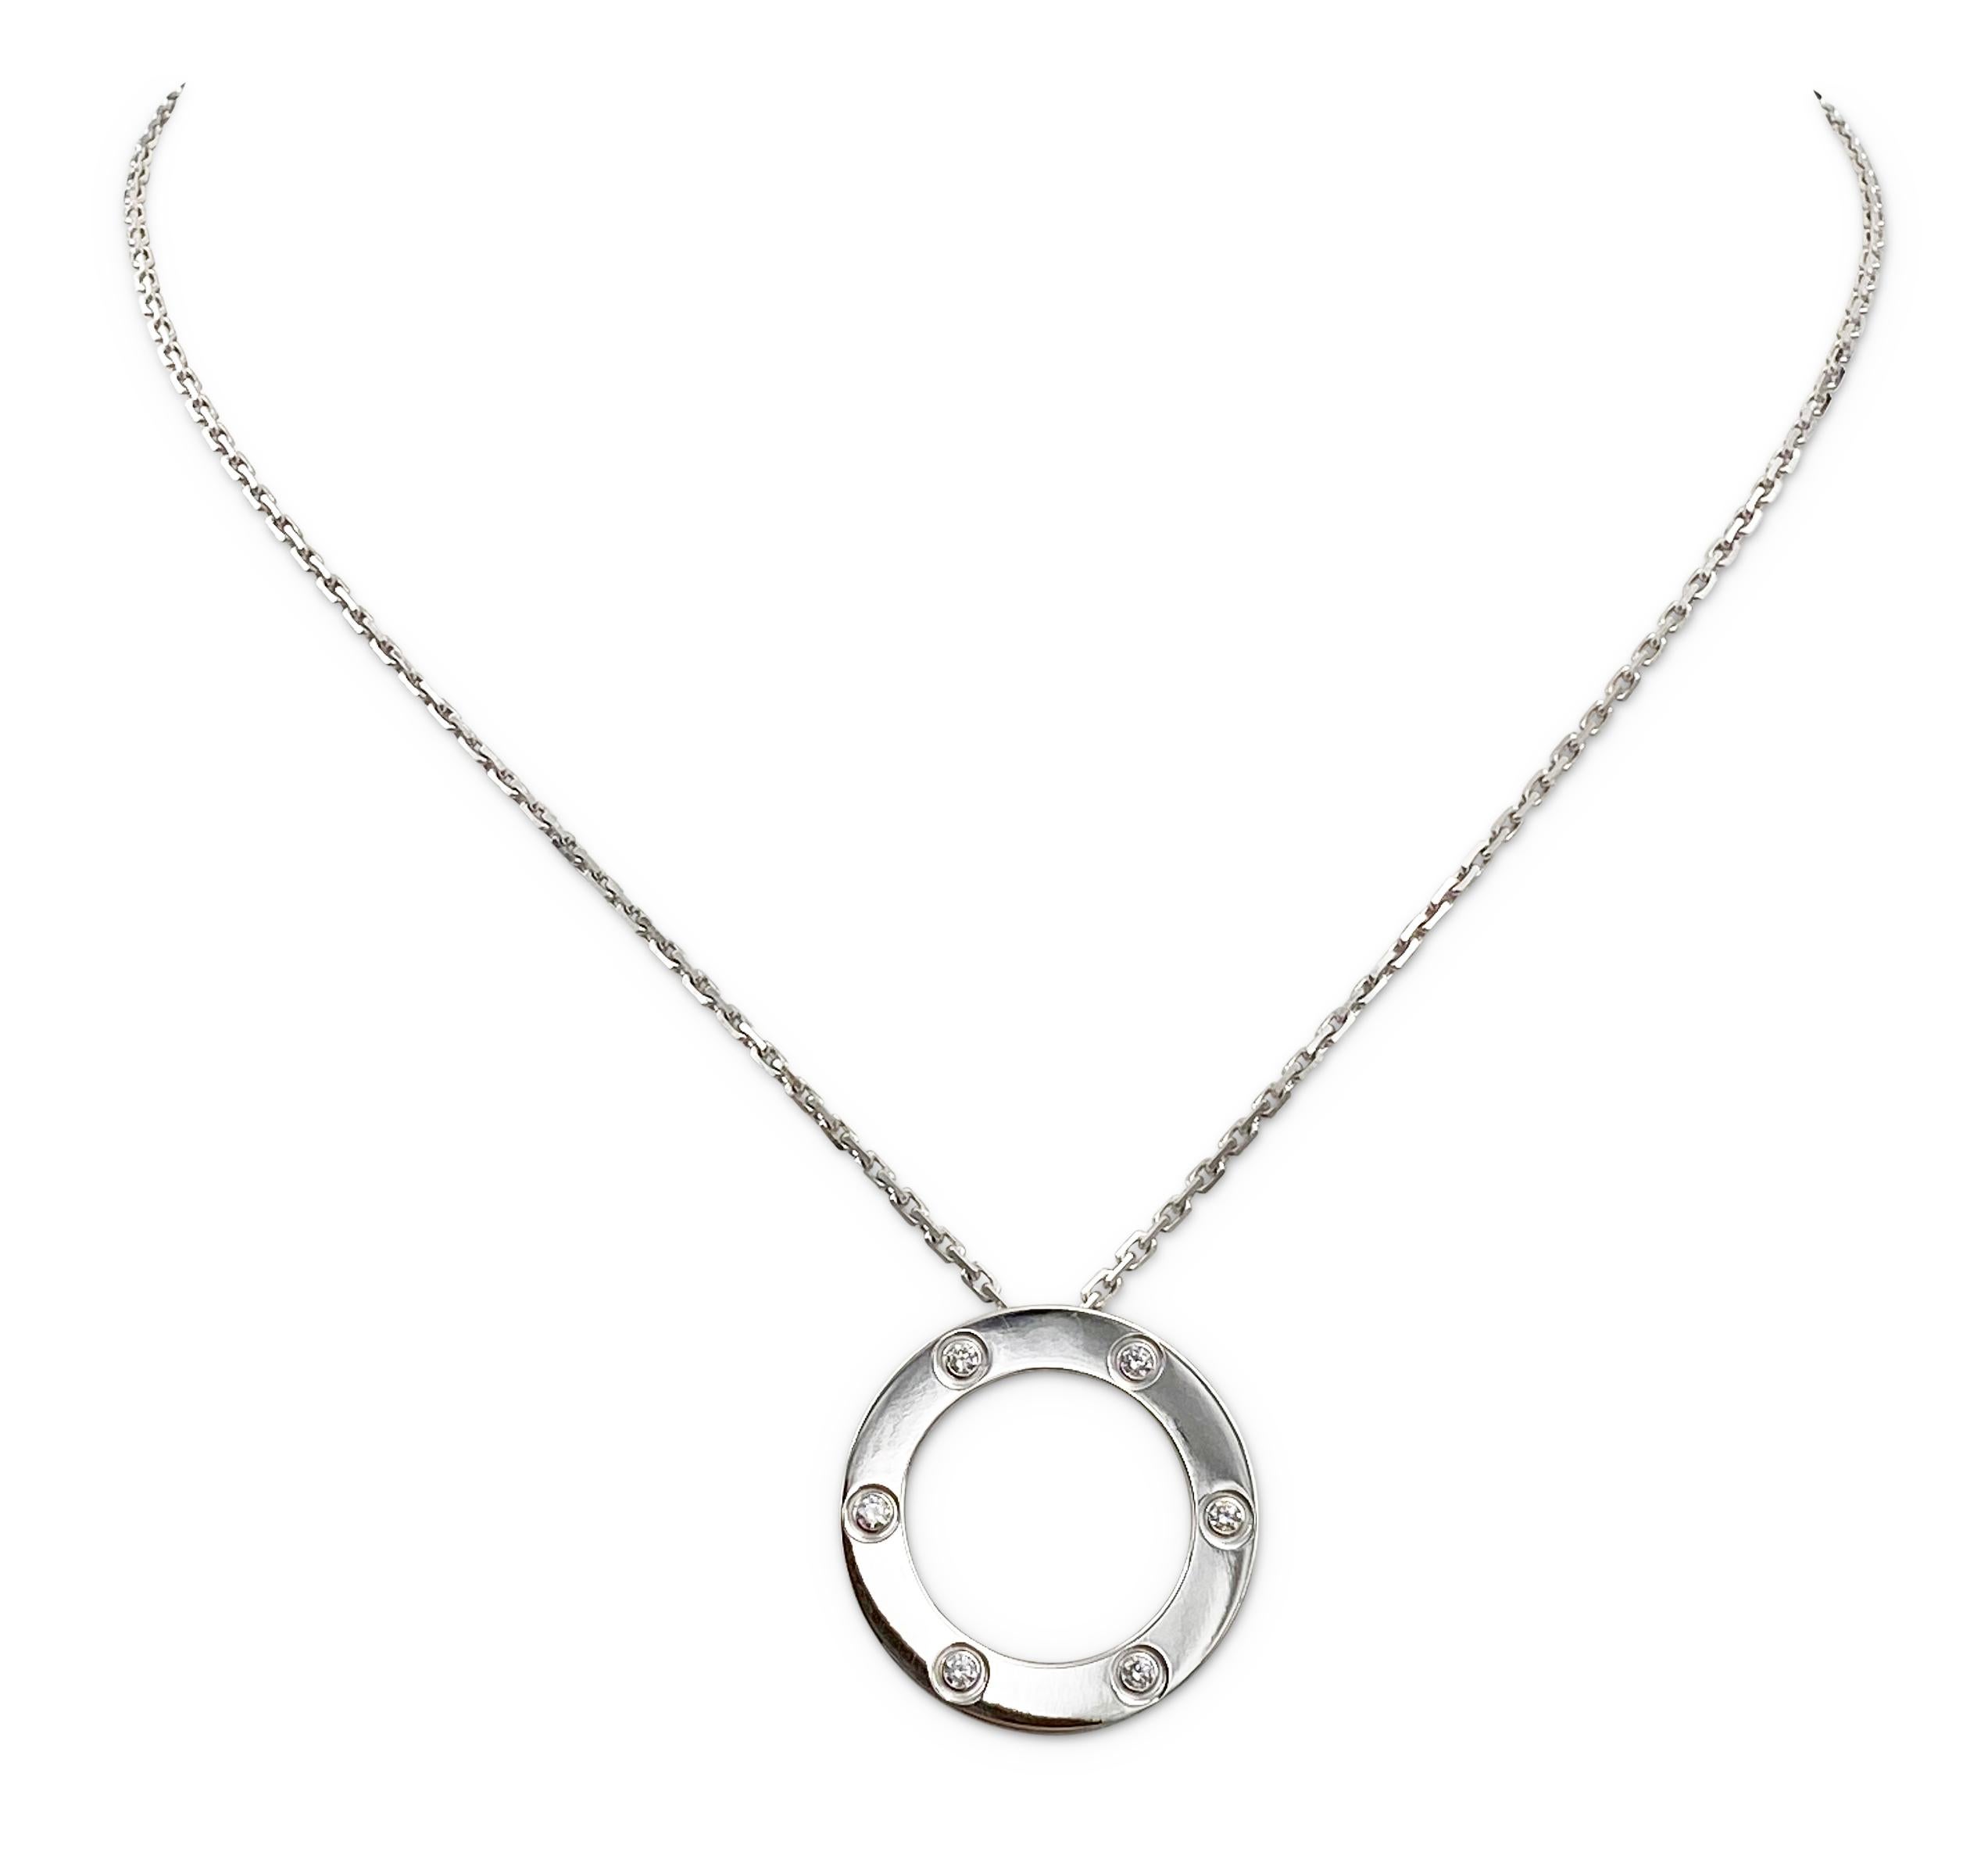 Authentic chain and ring charm necklace from the Cartier Love collection. Made in 18 karat white gold and oval link chain with a half-inch round ring and screw top motifs set with 6 round brilliant cut diamonds (F color, VS clarity) of approximately